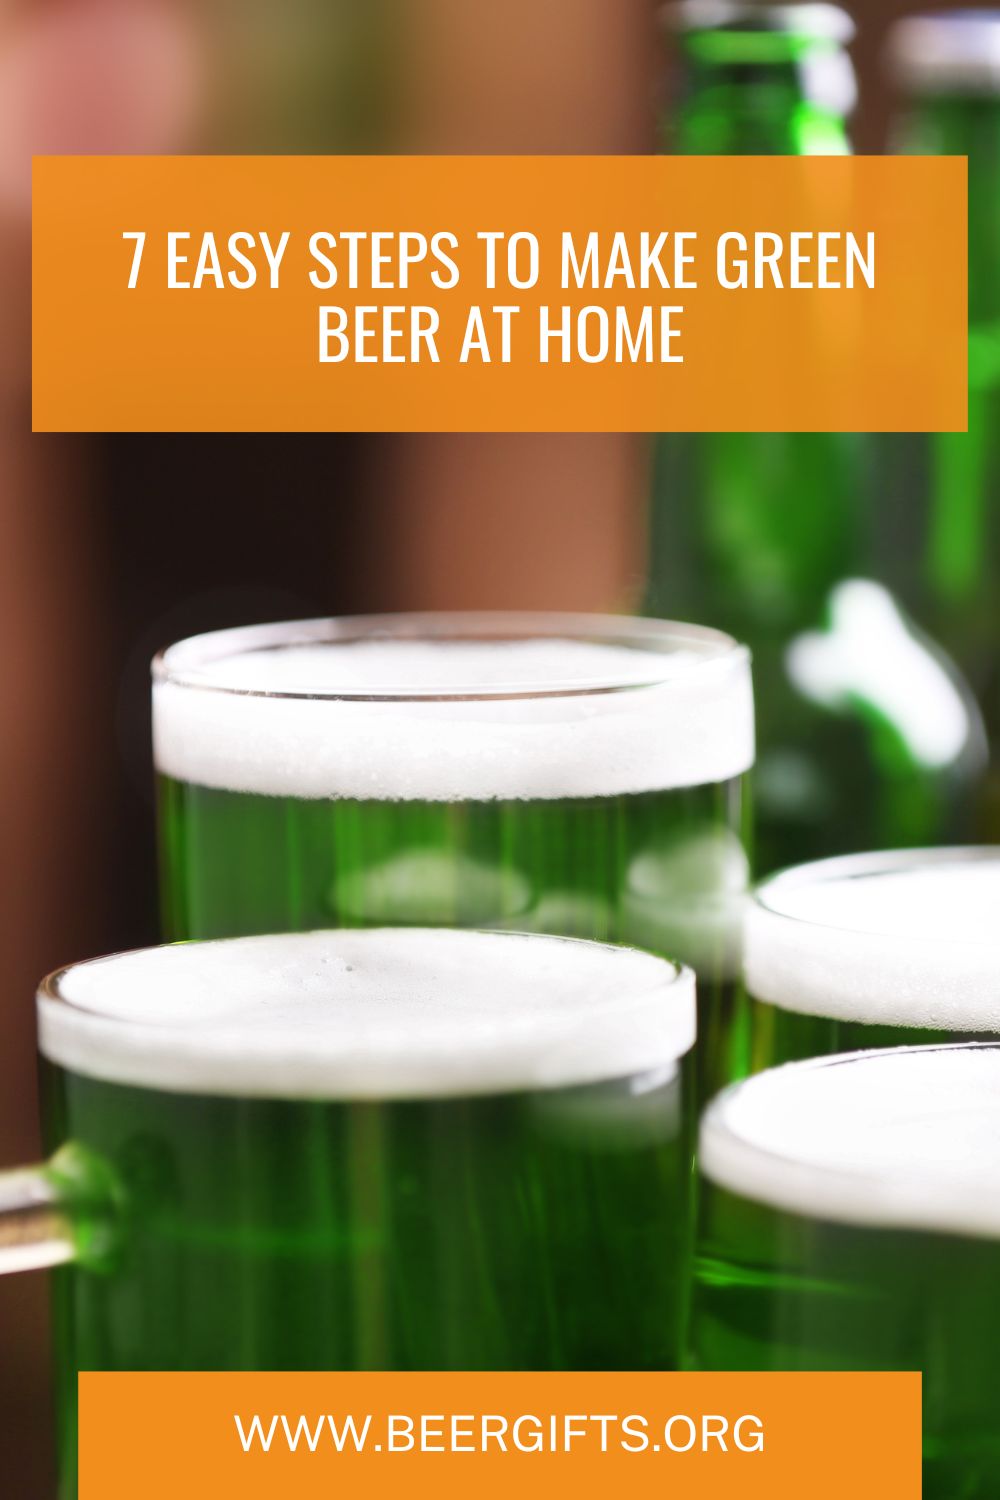 7 Easy Steps to Make Green Beer at Home8